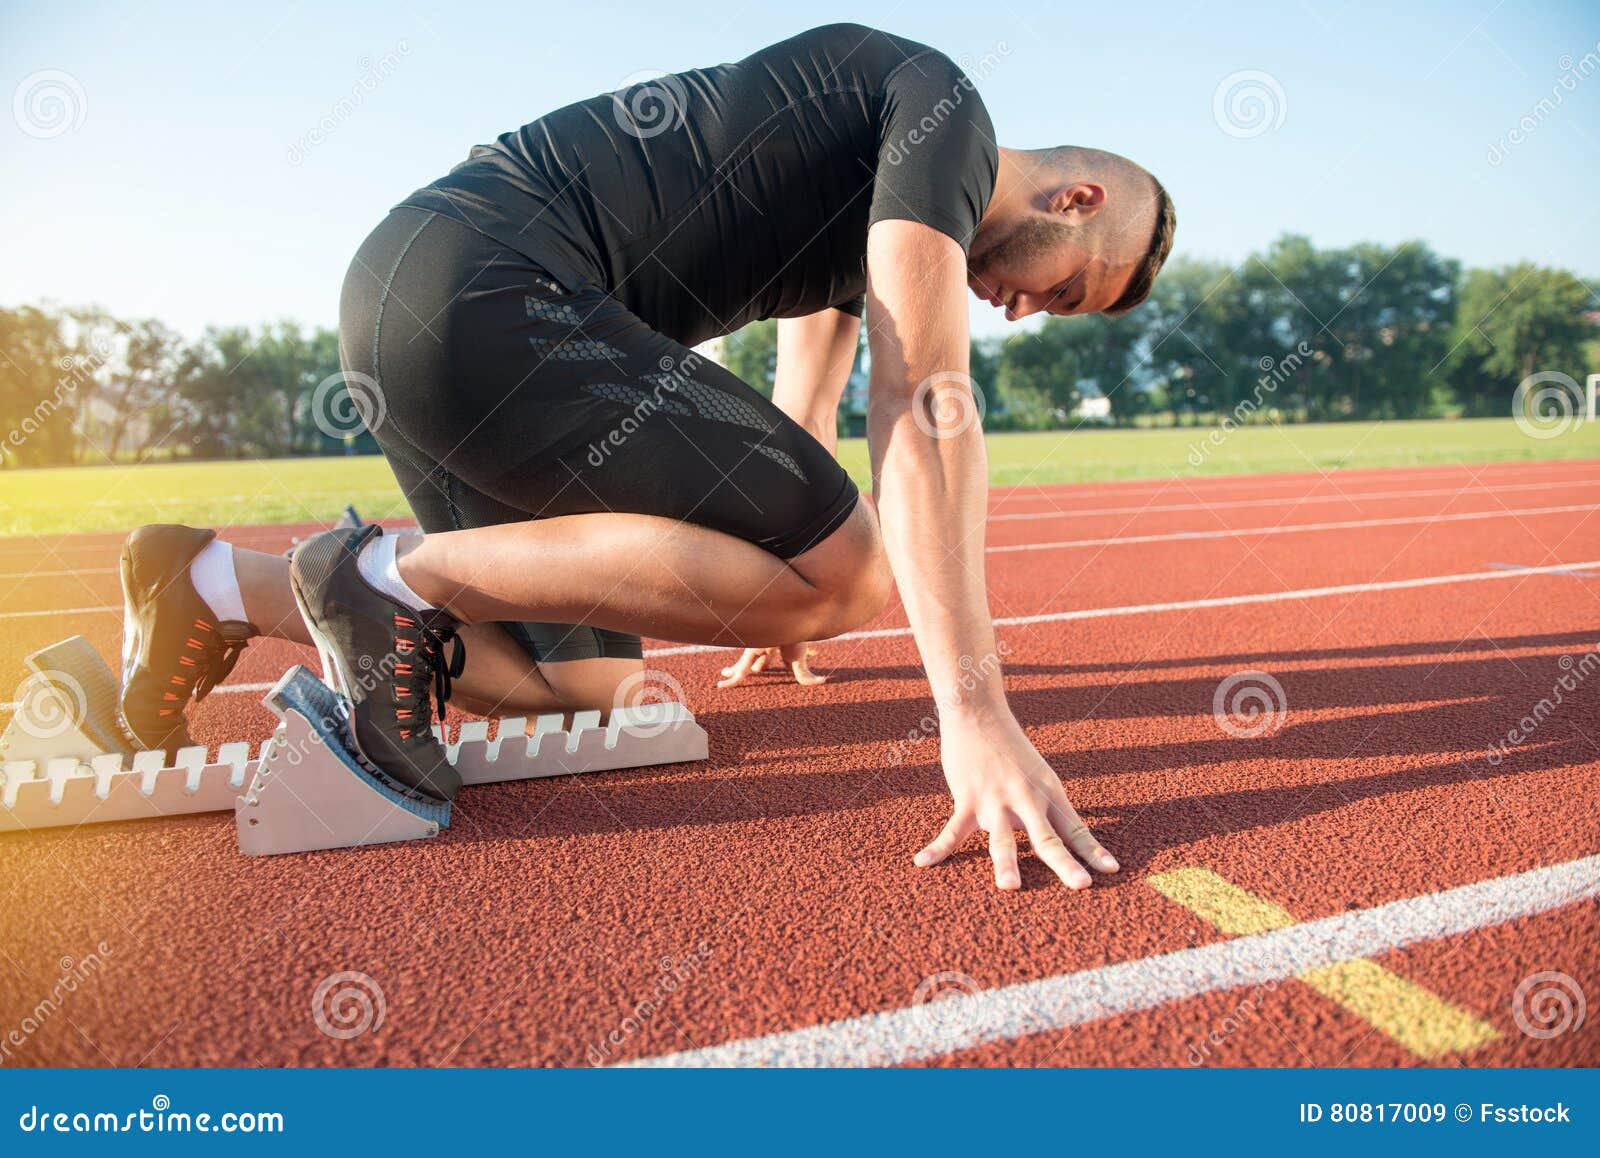 Male Athlete on Starting Position at Athletics Running Track. Stock Image -  Image of event, olympic: 80817009